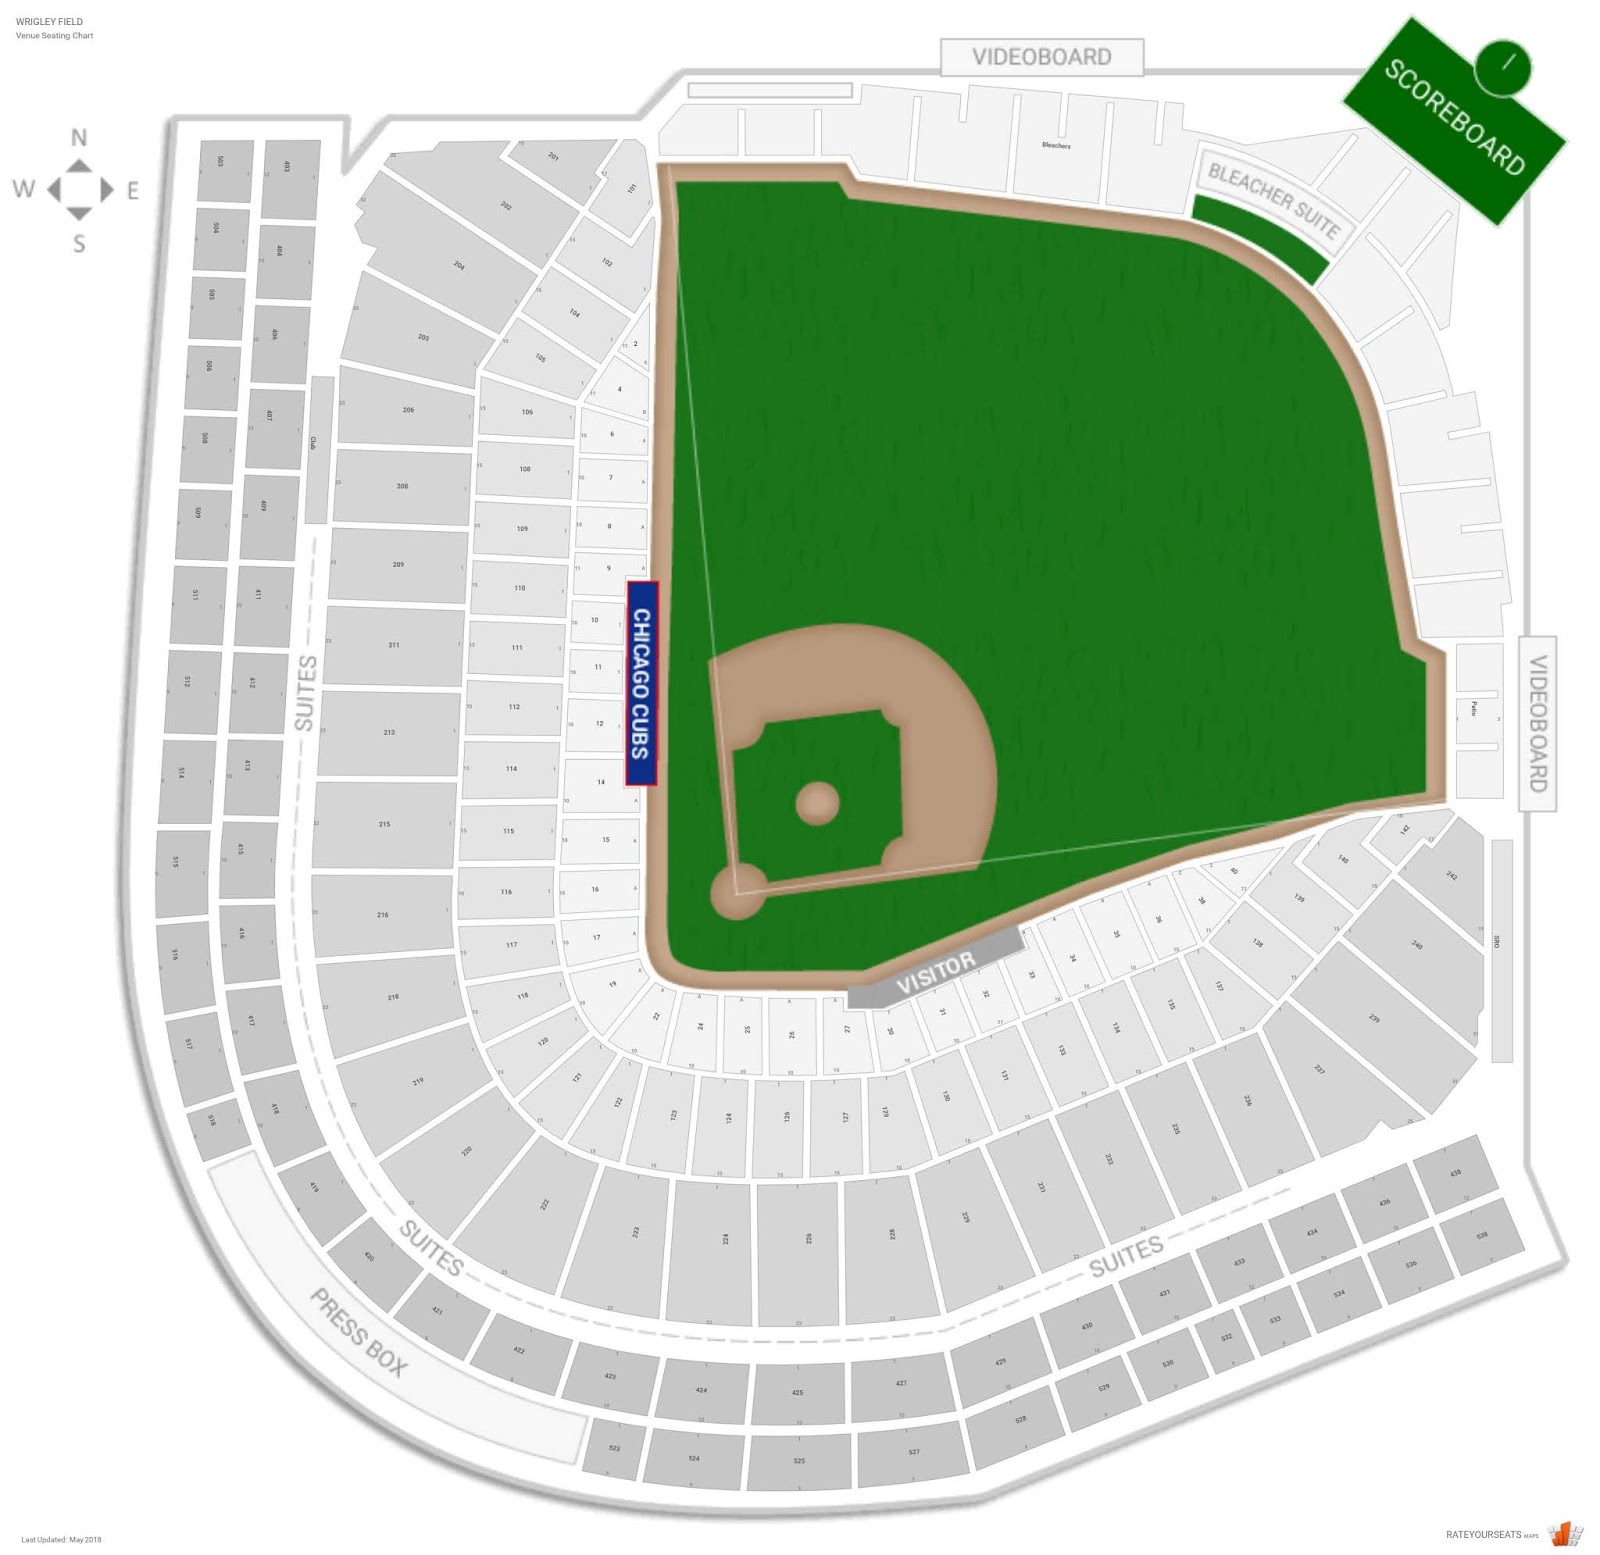 Target Field Seating Chart With Rows And Seat Numbers